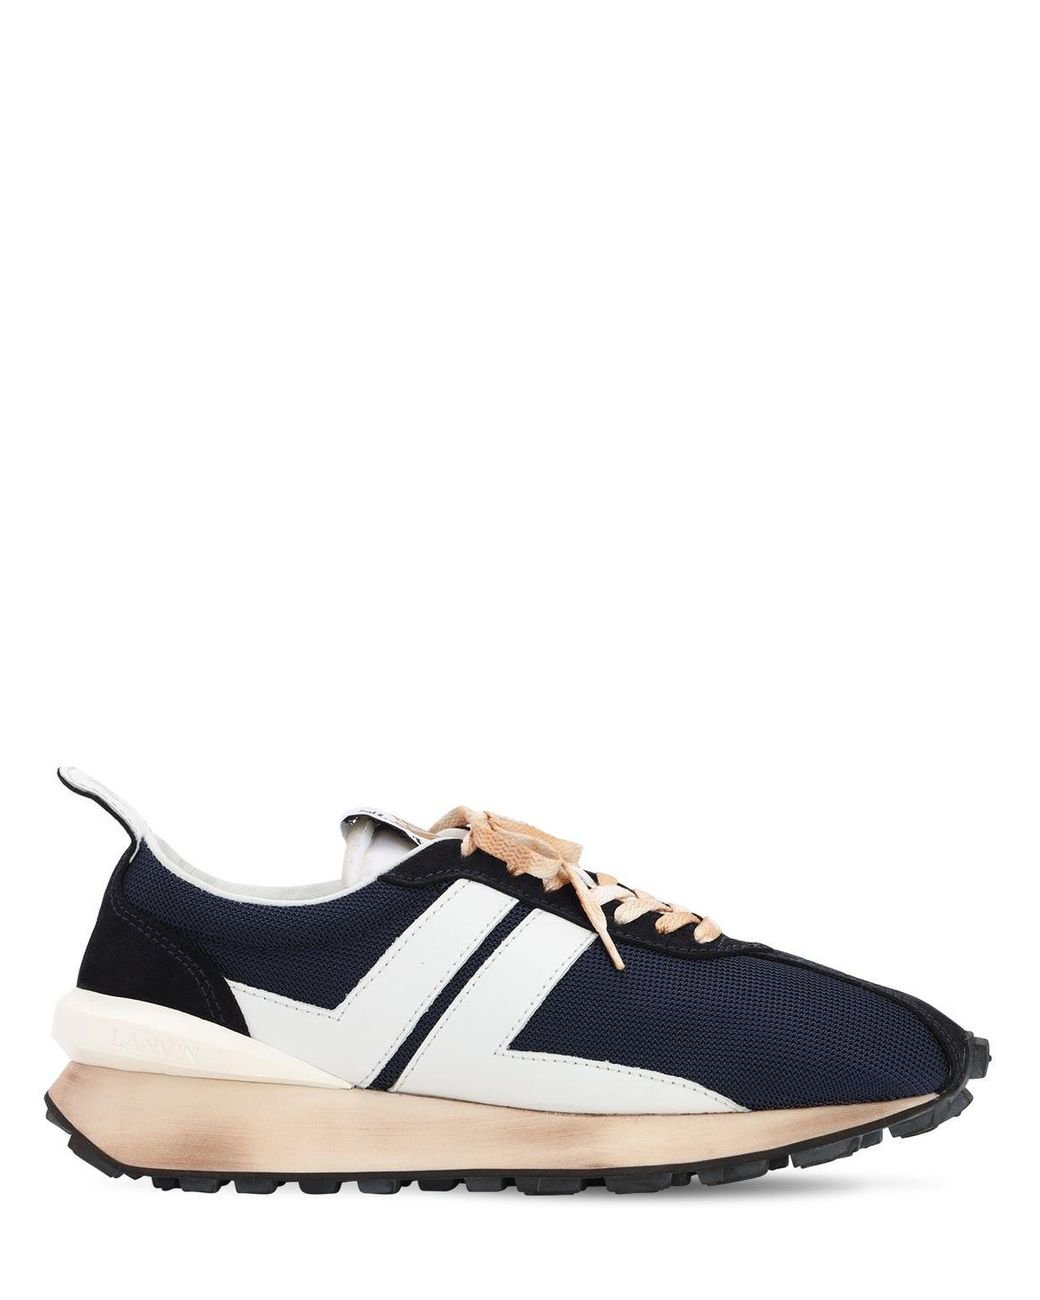 Lanvin Leather Navy And White Running Sneakers in Blue for Men - Save ...